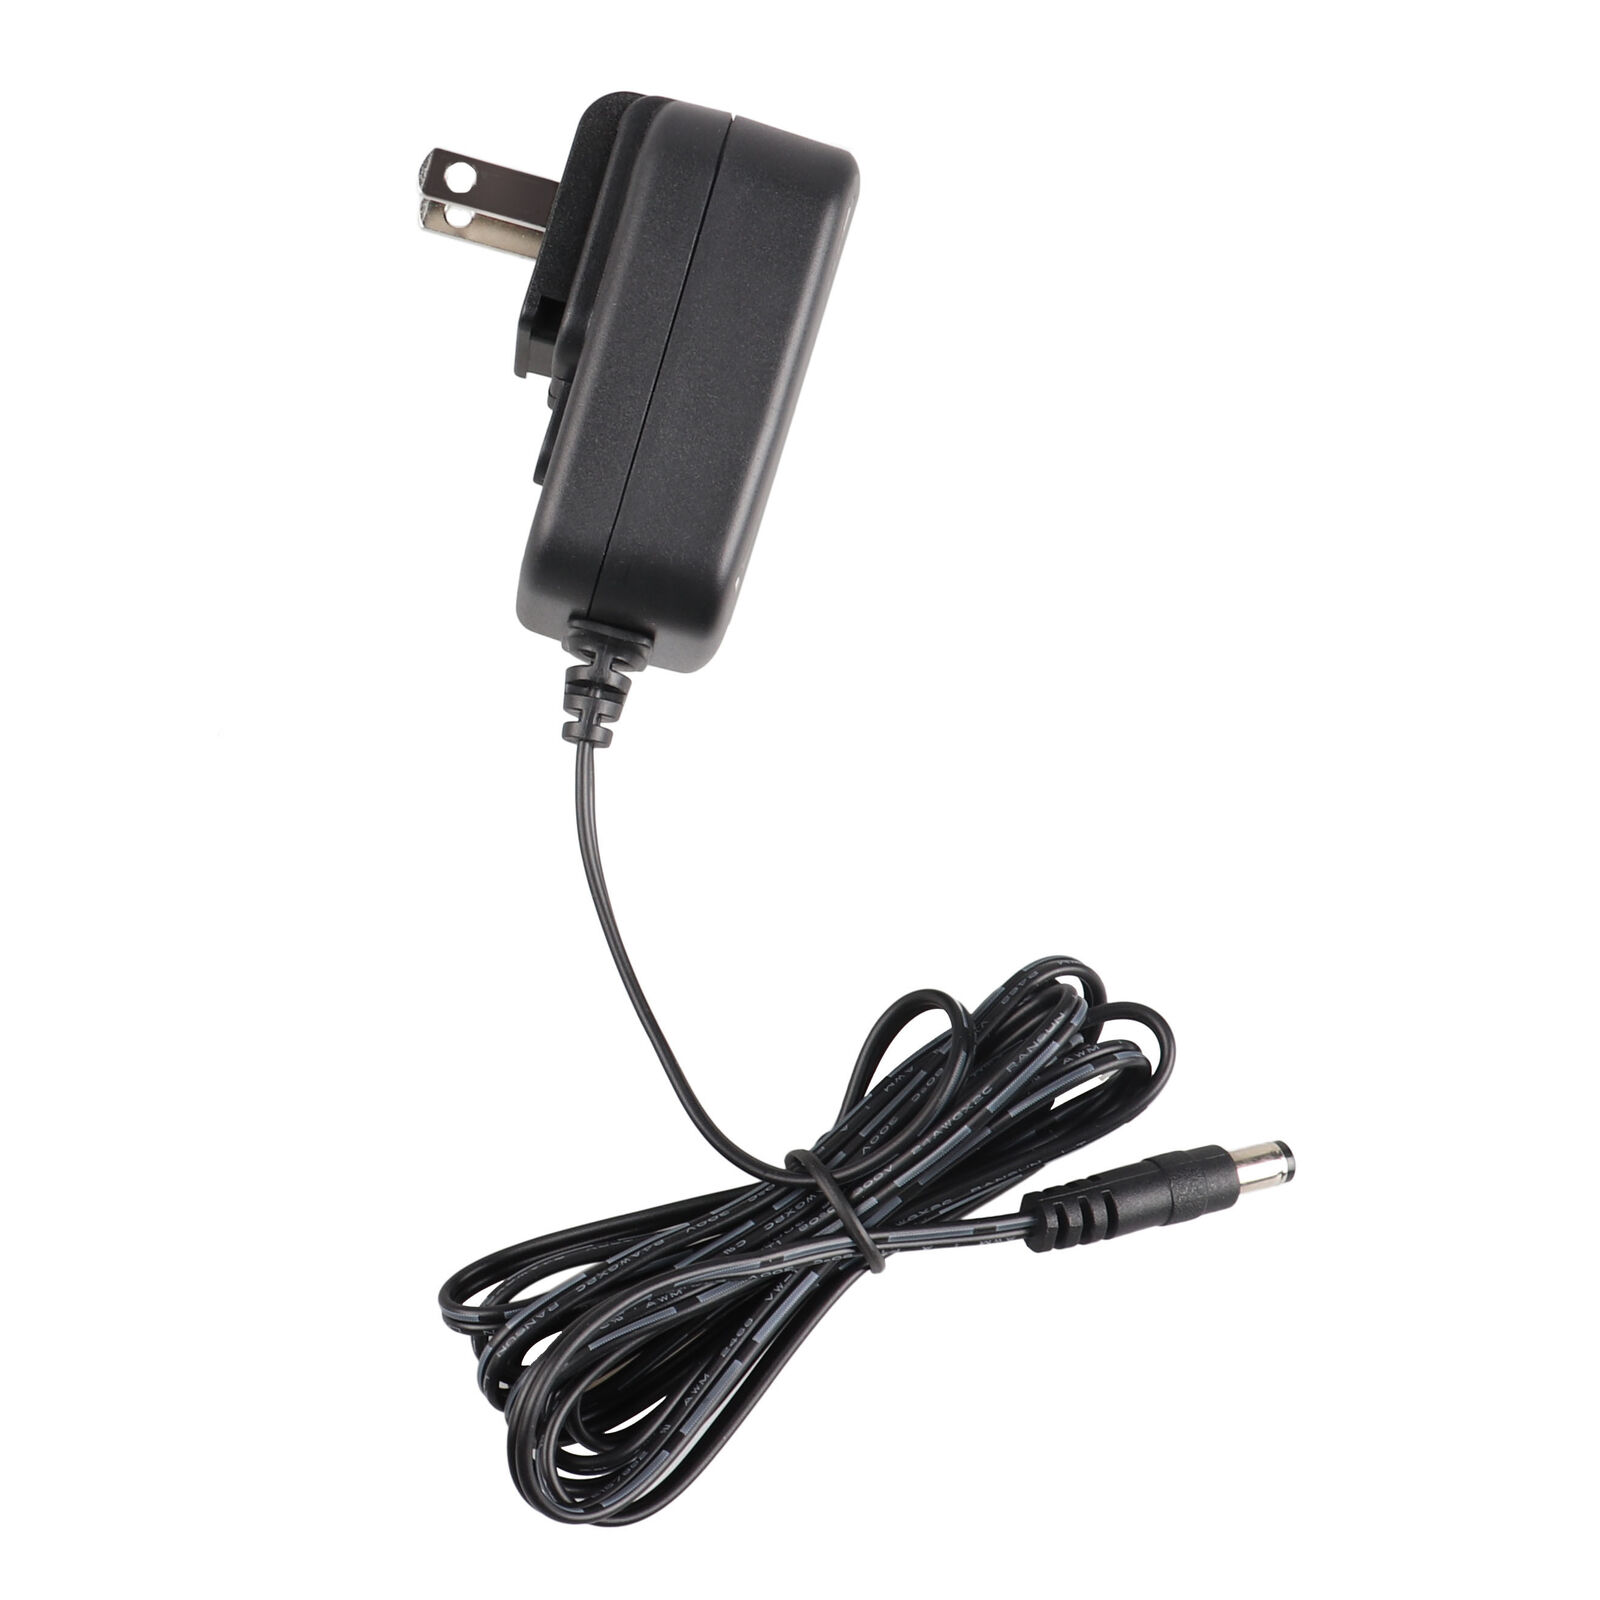 *Brand NEW* Defiant LED Spotlight Switching AC Adapter Wall Charger Power Supply Cable